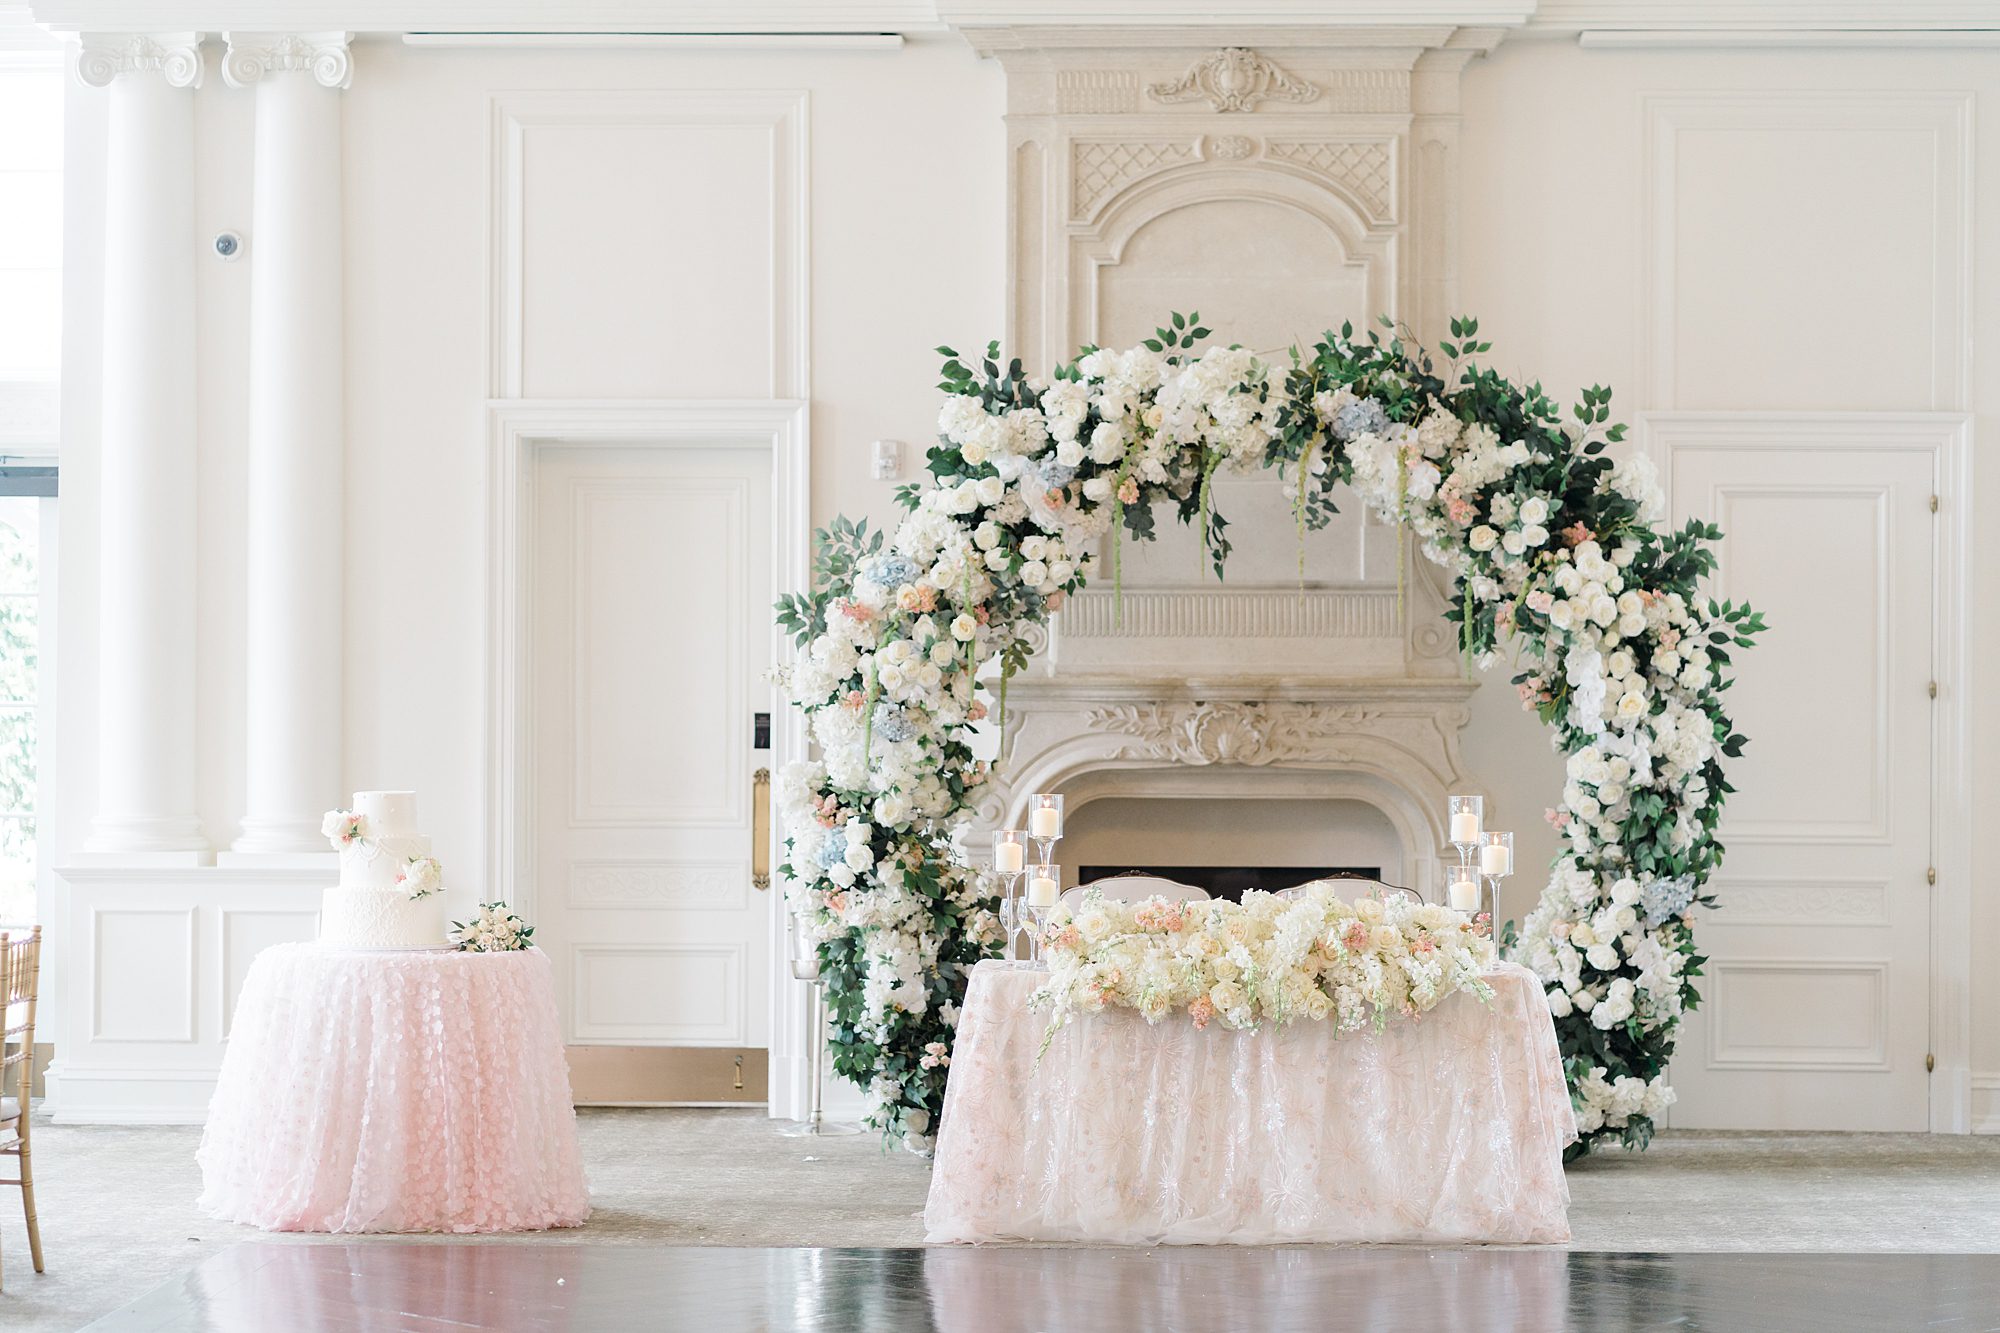 Sweetheart table decorated with white and dusty pink flowers